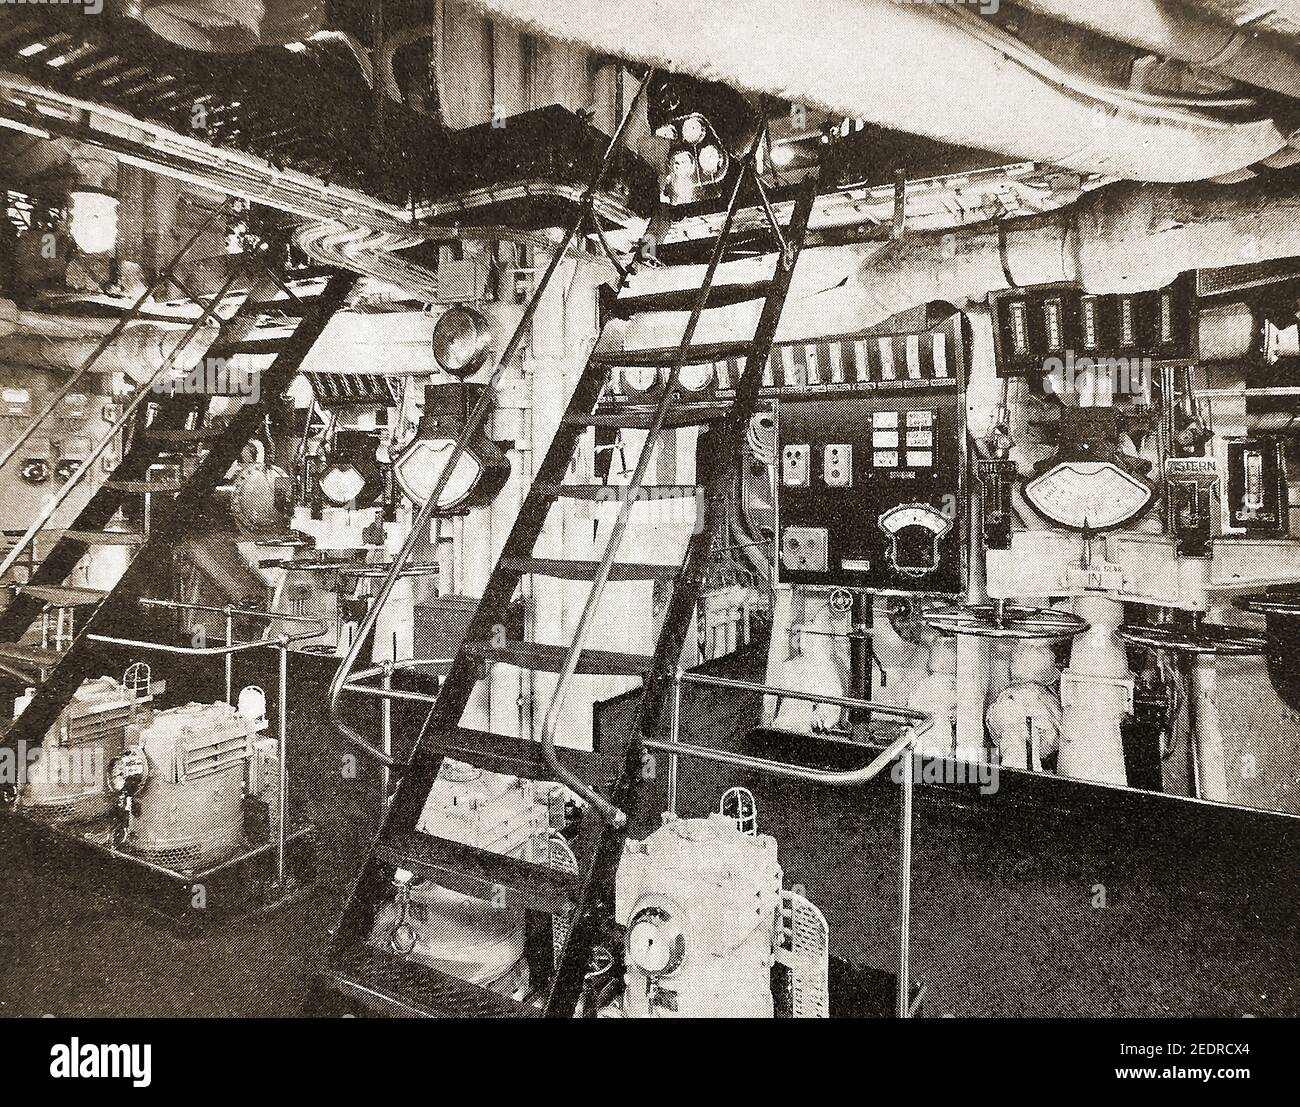 An early printed photograph of the control platform of the engine room aboard the P & O Liner HIMALAYA. Following WWII, P & O began rebuilding their passenger fleet with the S S  HIMALAY at Vickers Armstrong shipyard  at Barrow-in-Furness. The 28,047 gross ton liner was at the time the largest passenger liner in the world. The vessel had an  innovative Weir system evaporating plant for distilling  fresh drinking water from sea water. Her Yard Number  was 951 and she was launched  by Lady Curry, wife of the P&O Chairman, on 5th October 1948. Stock Photo